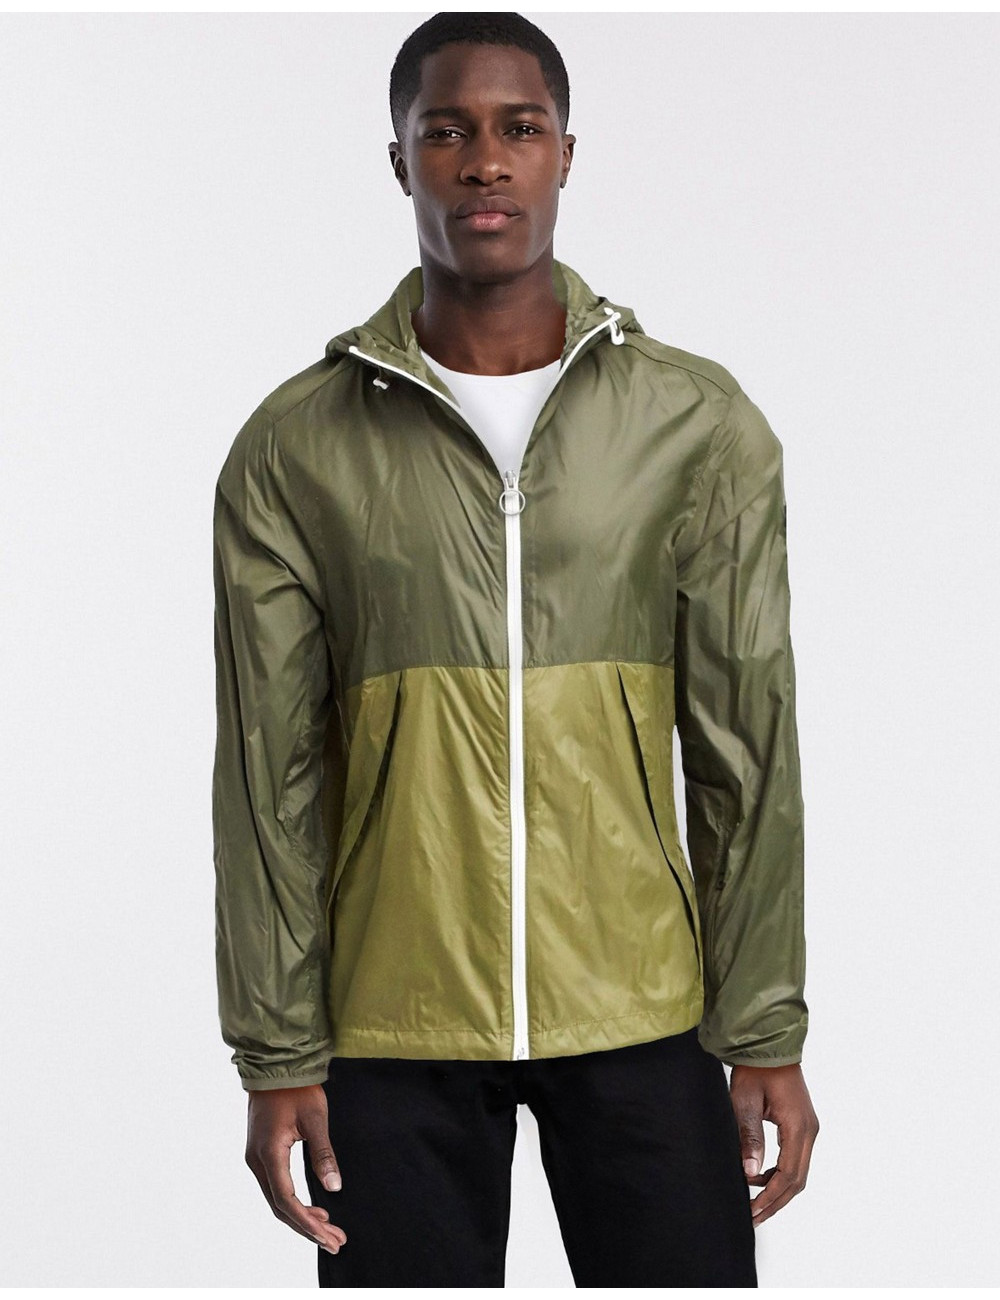 Timberland route racer jacket